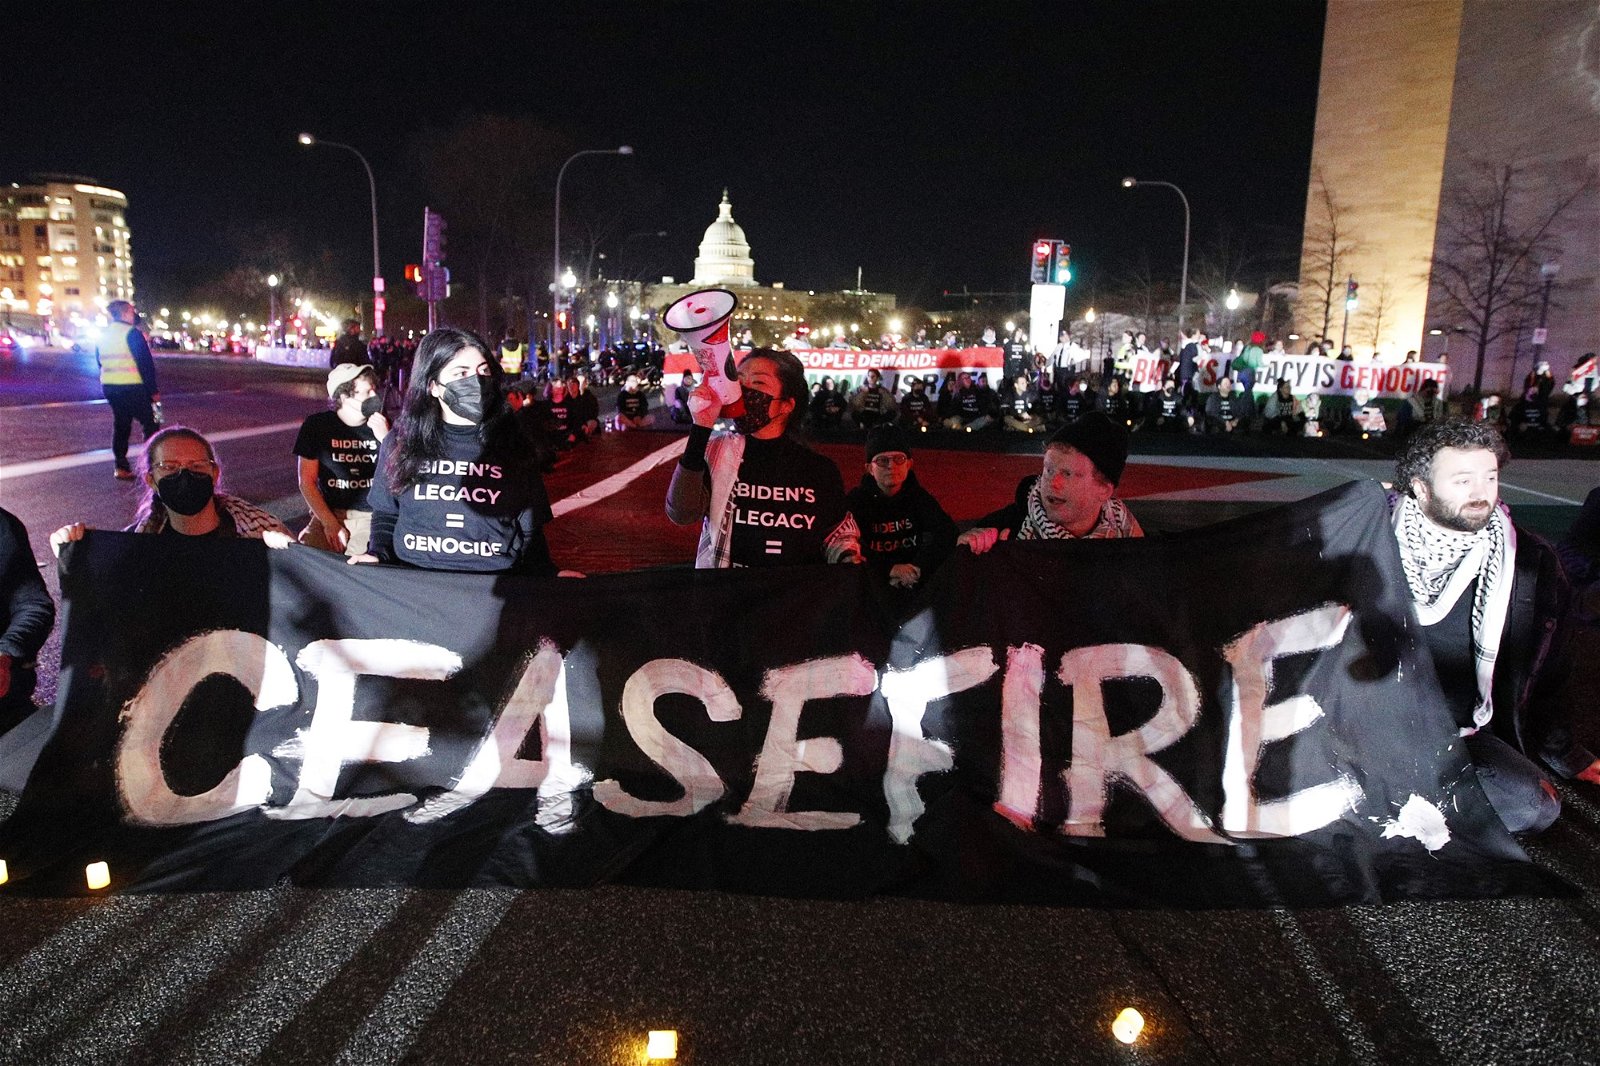 Protesters wearing black T shirts hold a sign with CEASFIRE on a road at night.